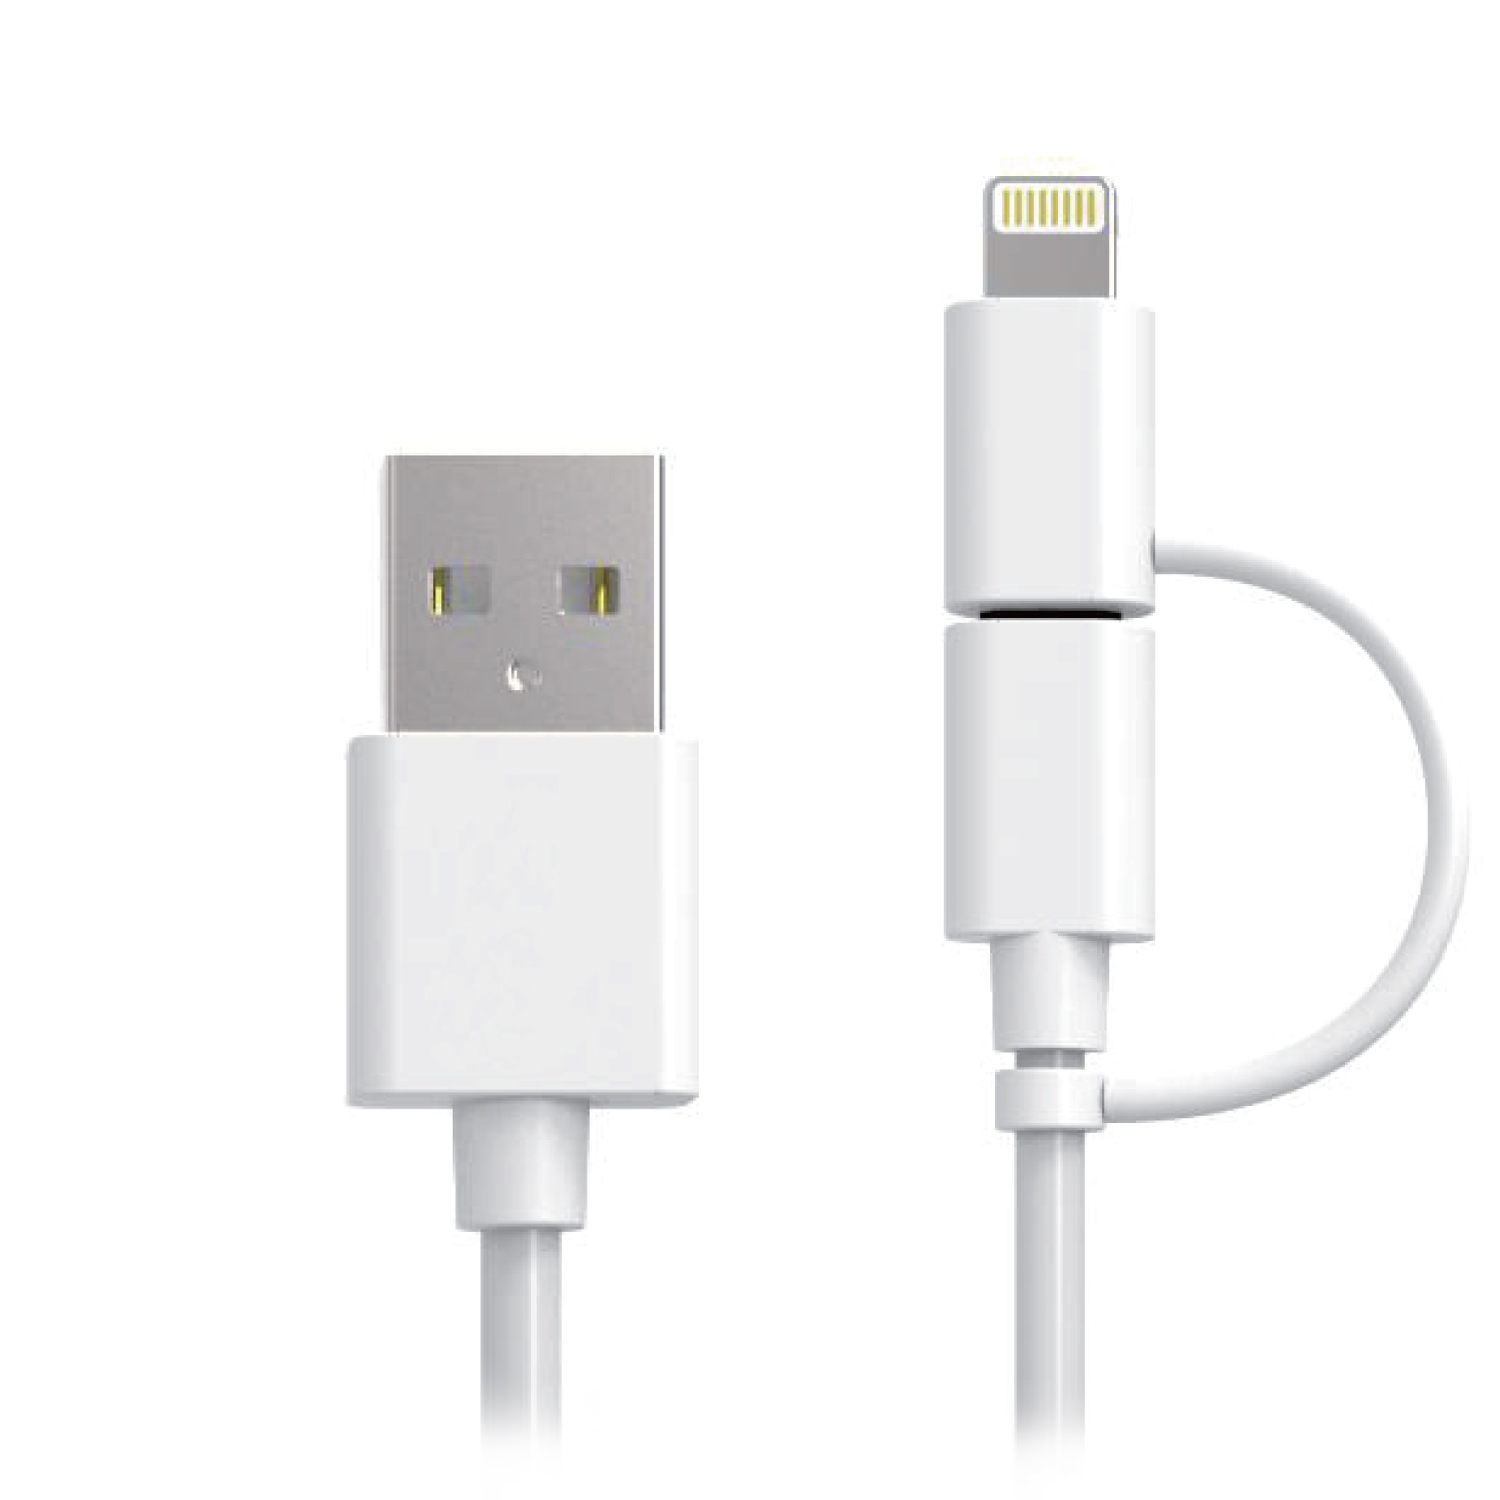 Cable 2 in 1 Lightning for iPhone, iPad + Micro-USB 1m - Schneider